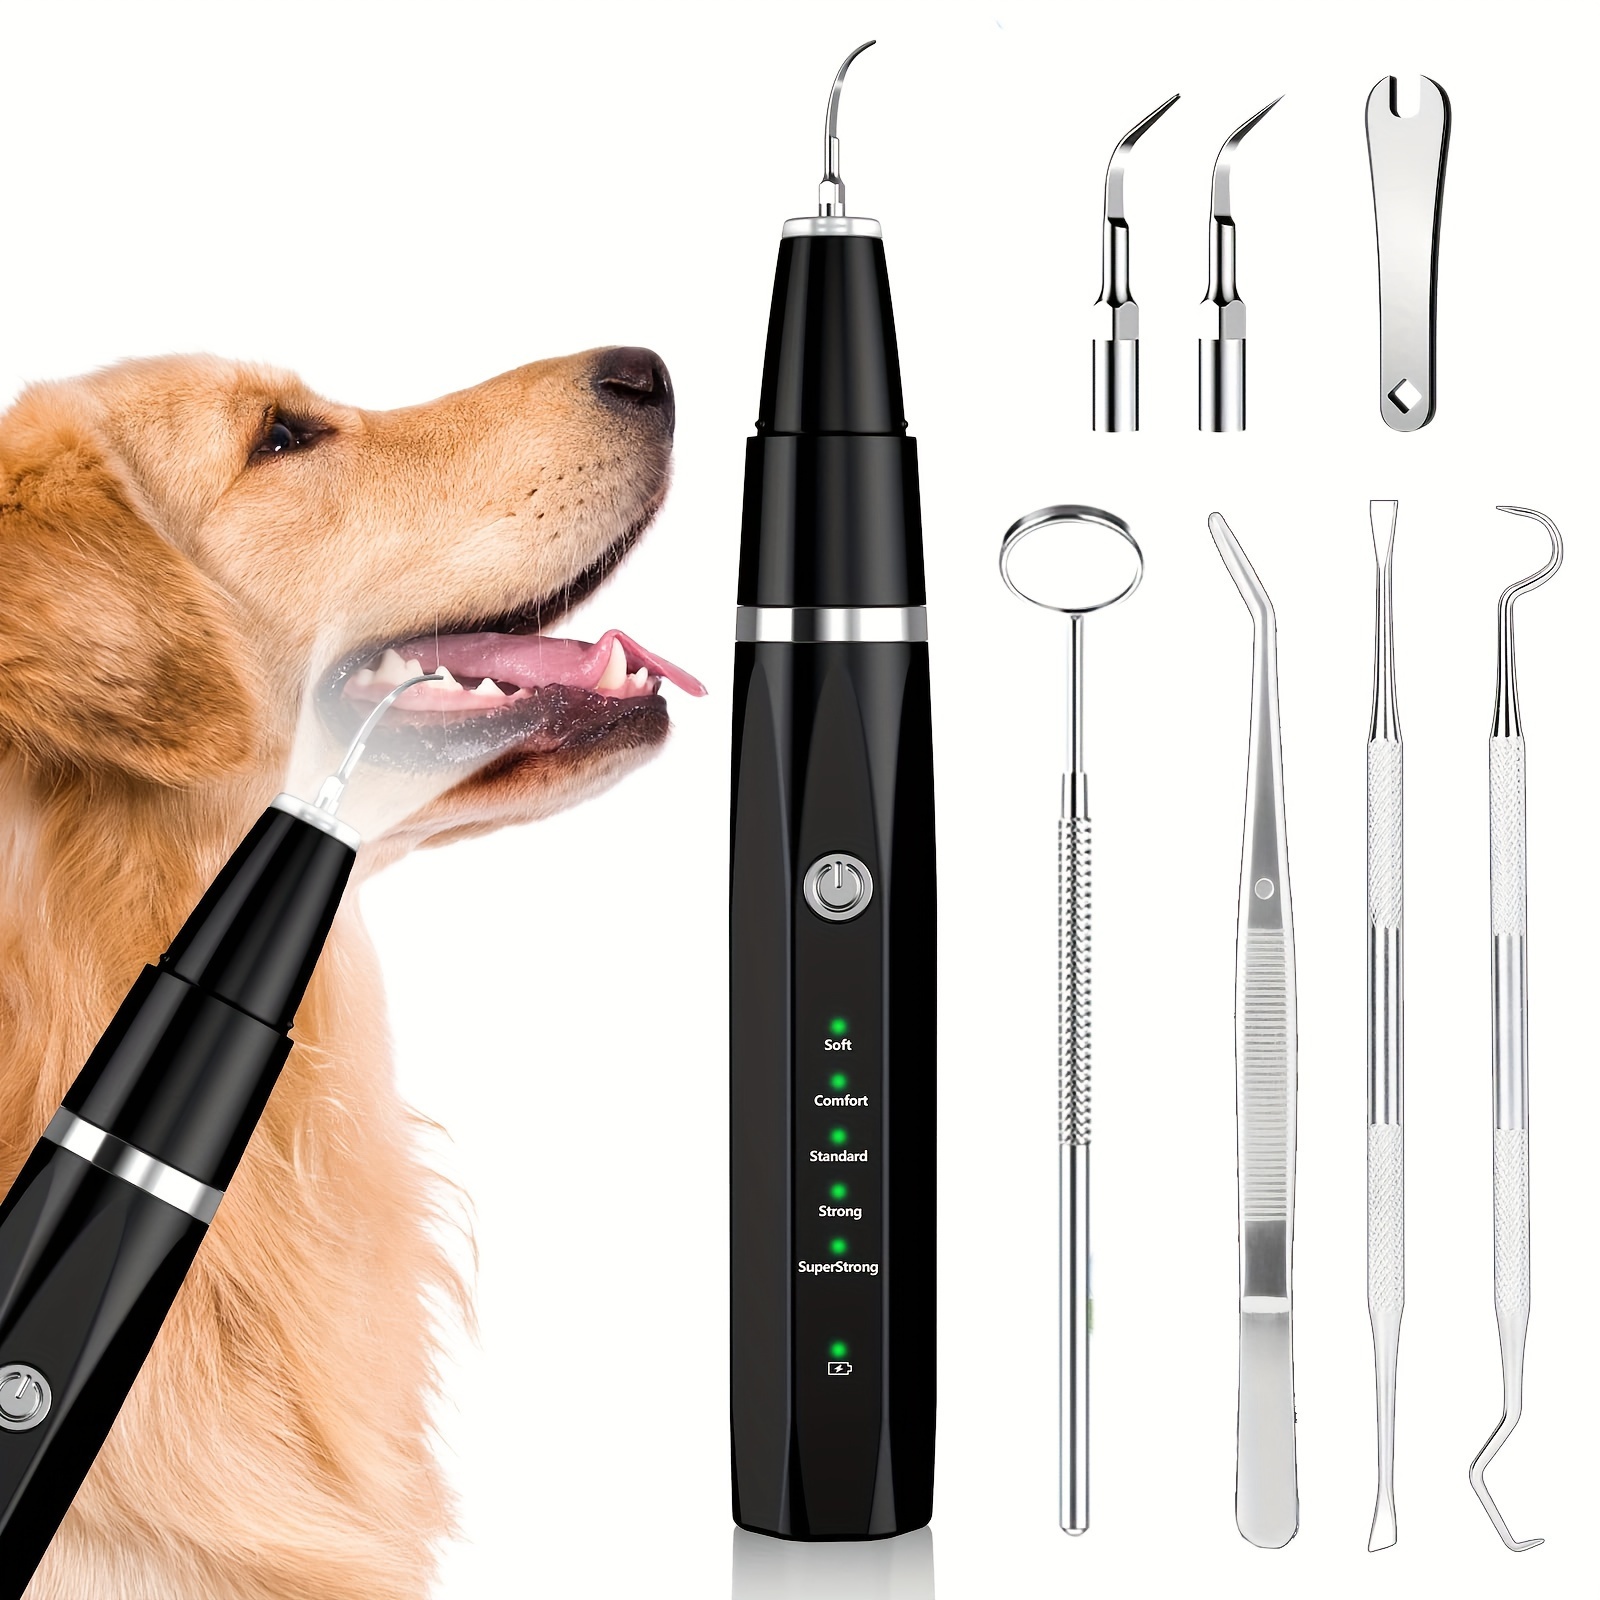 

Plaque Remover For Teeth - Pet Ultrasonic Cleaner - Teeth Cleaning Kit For Tartar And Stains - Suitable For Dogs And Cats